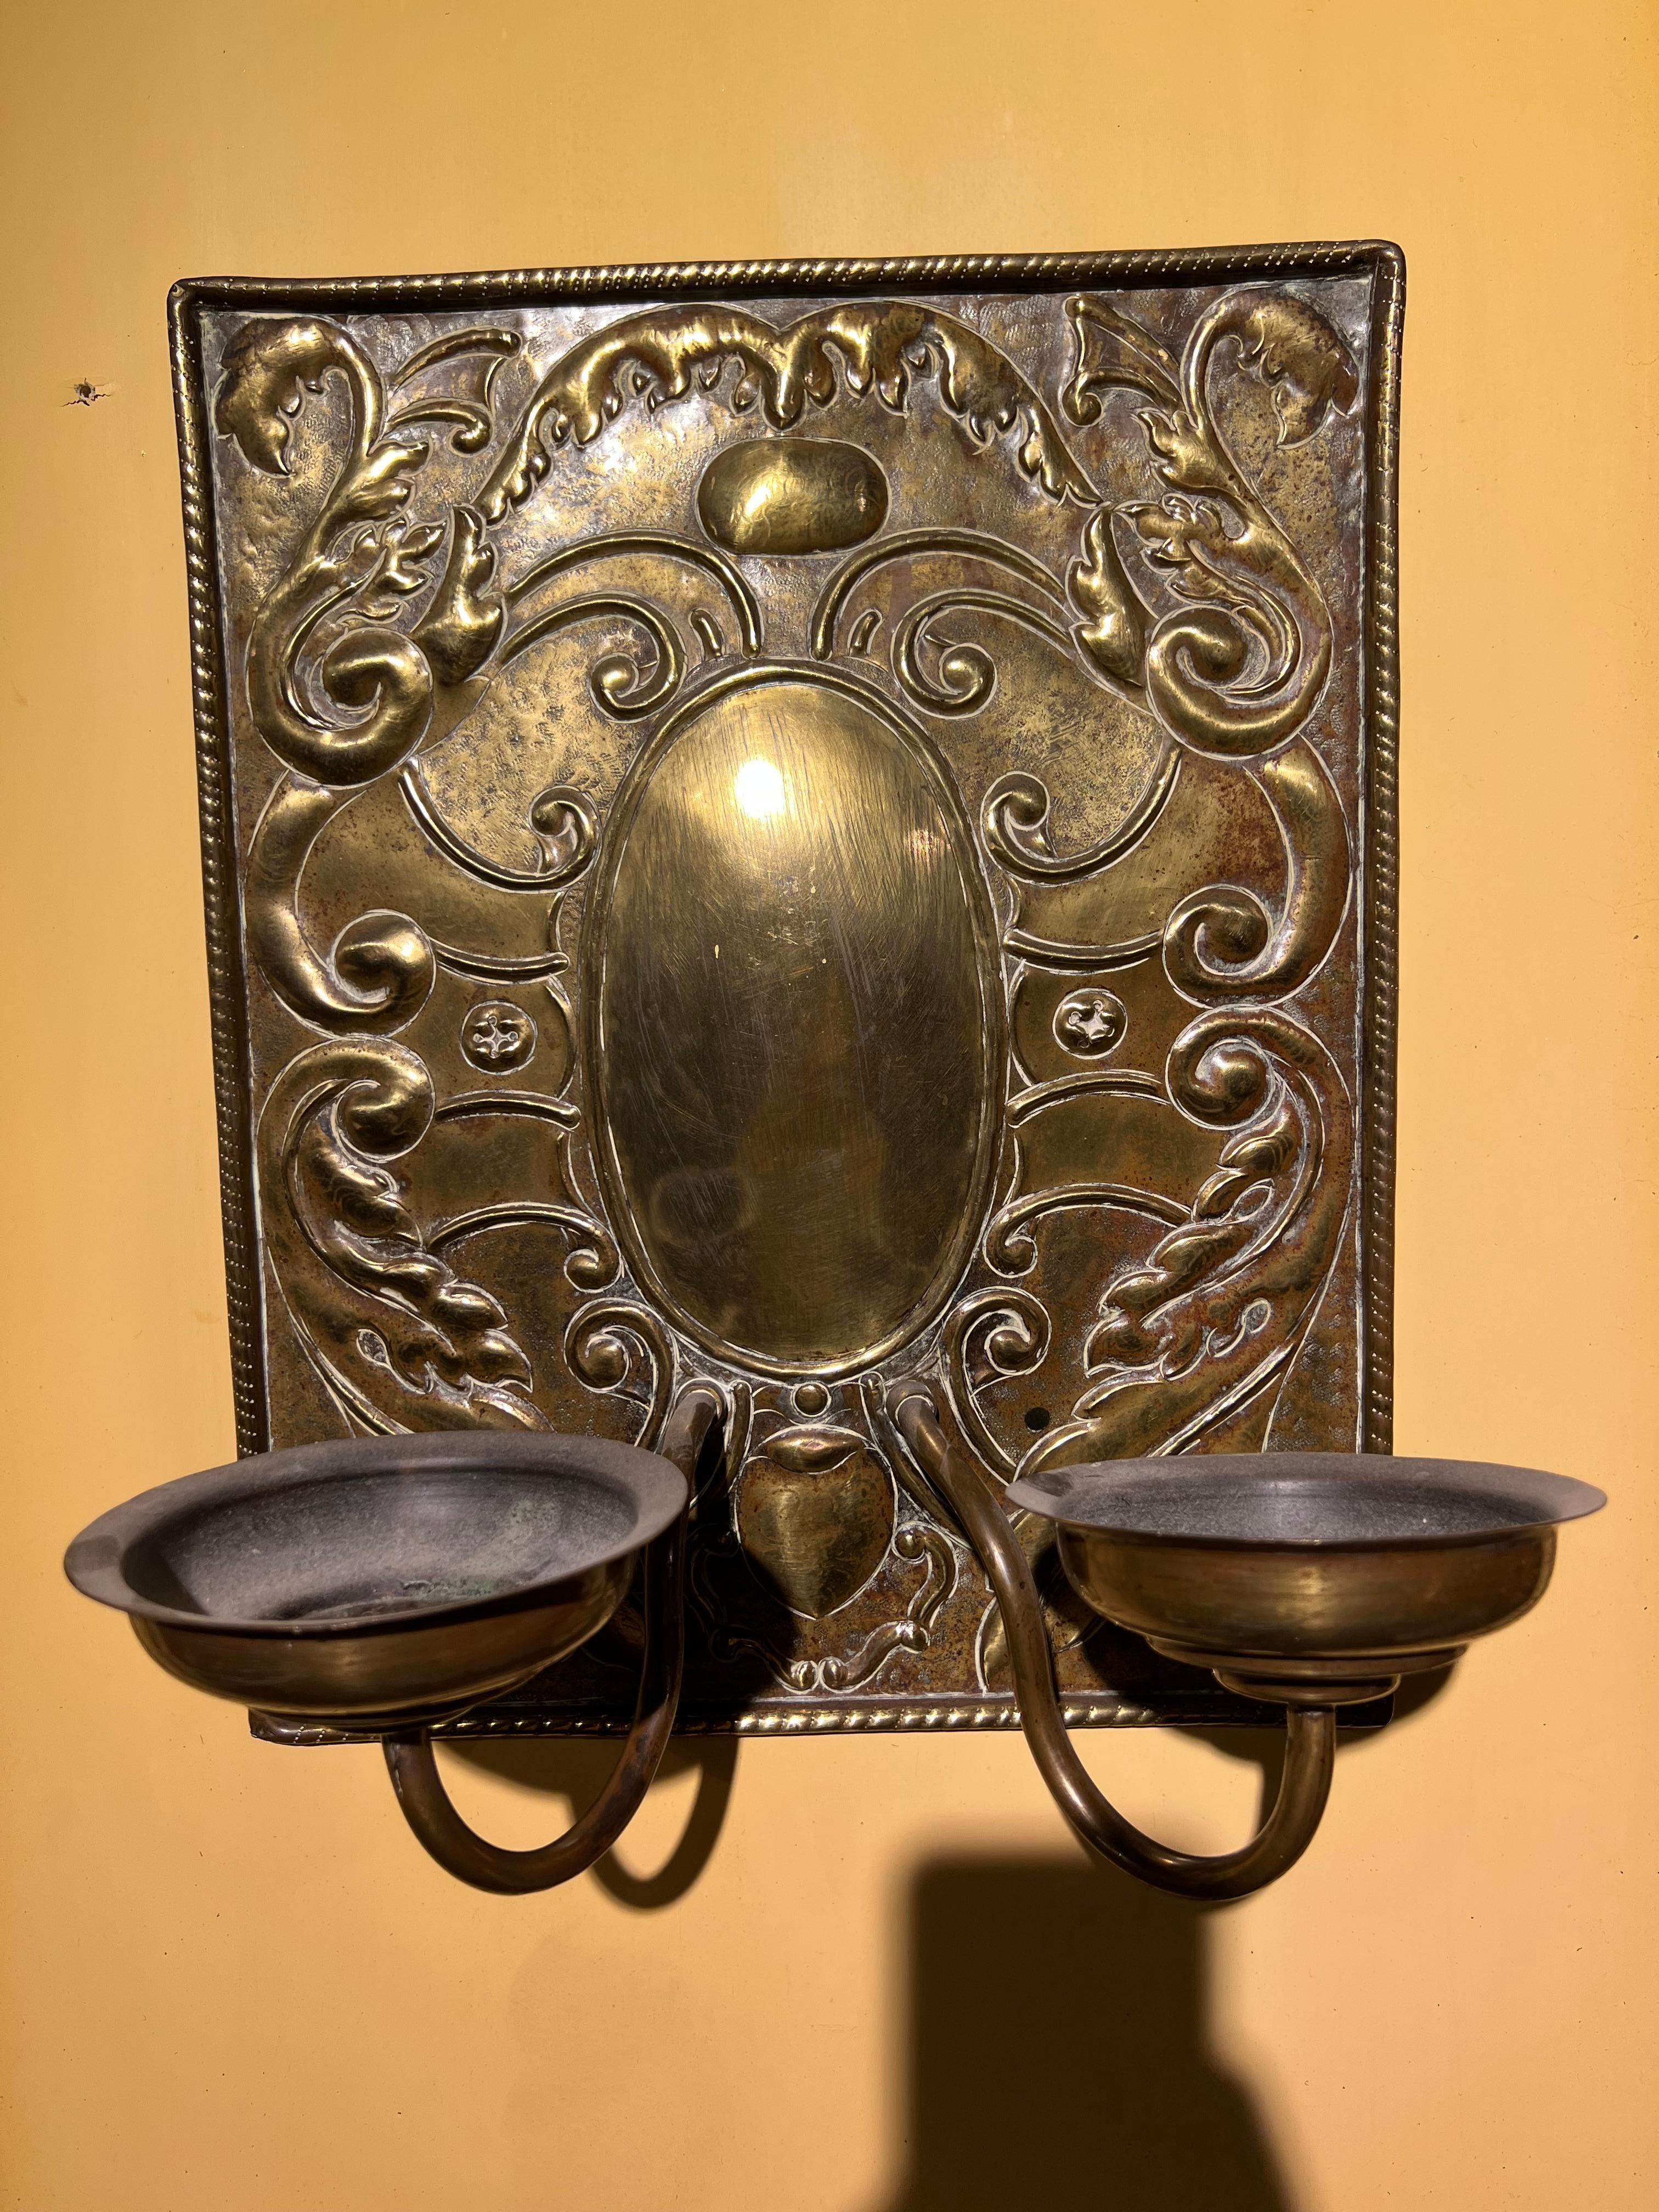 Antique blaker / sconce with a heavy wall plaque. The frame is made of brass. There are beautiful decorations on the wall sign.